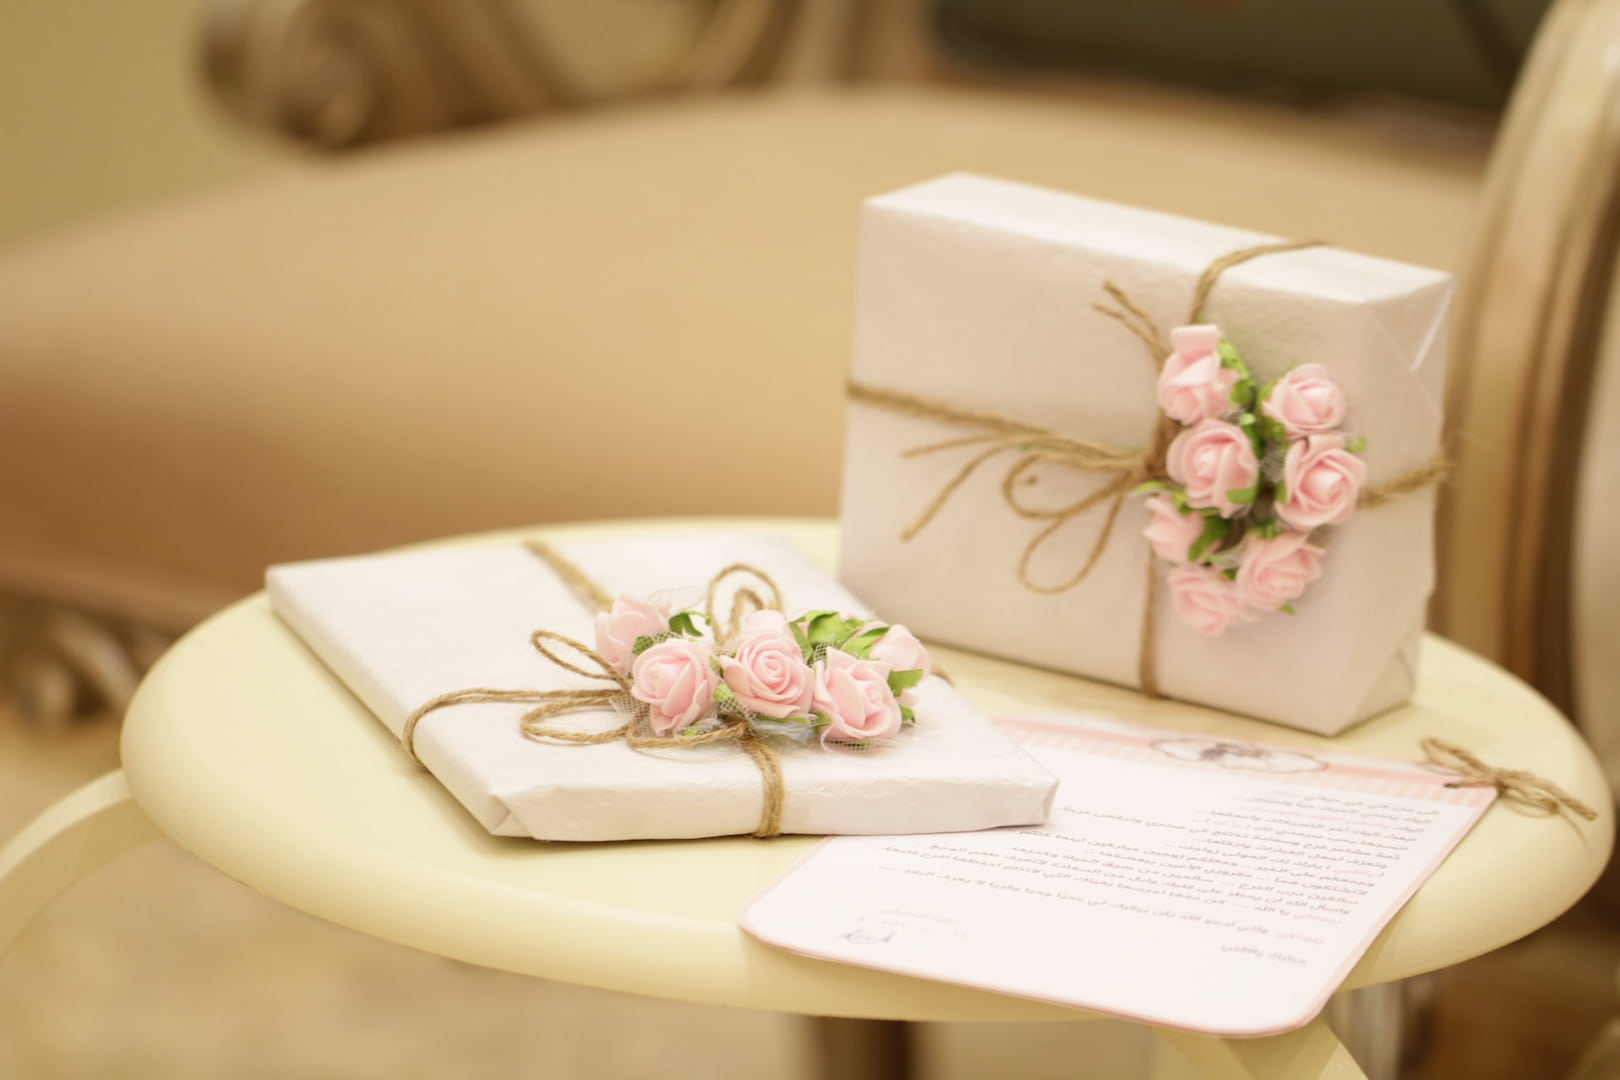 Two wrapped gifts with roses on a table